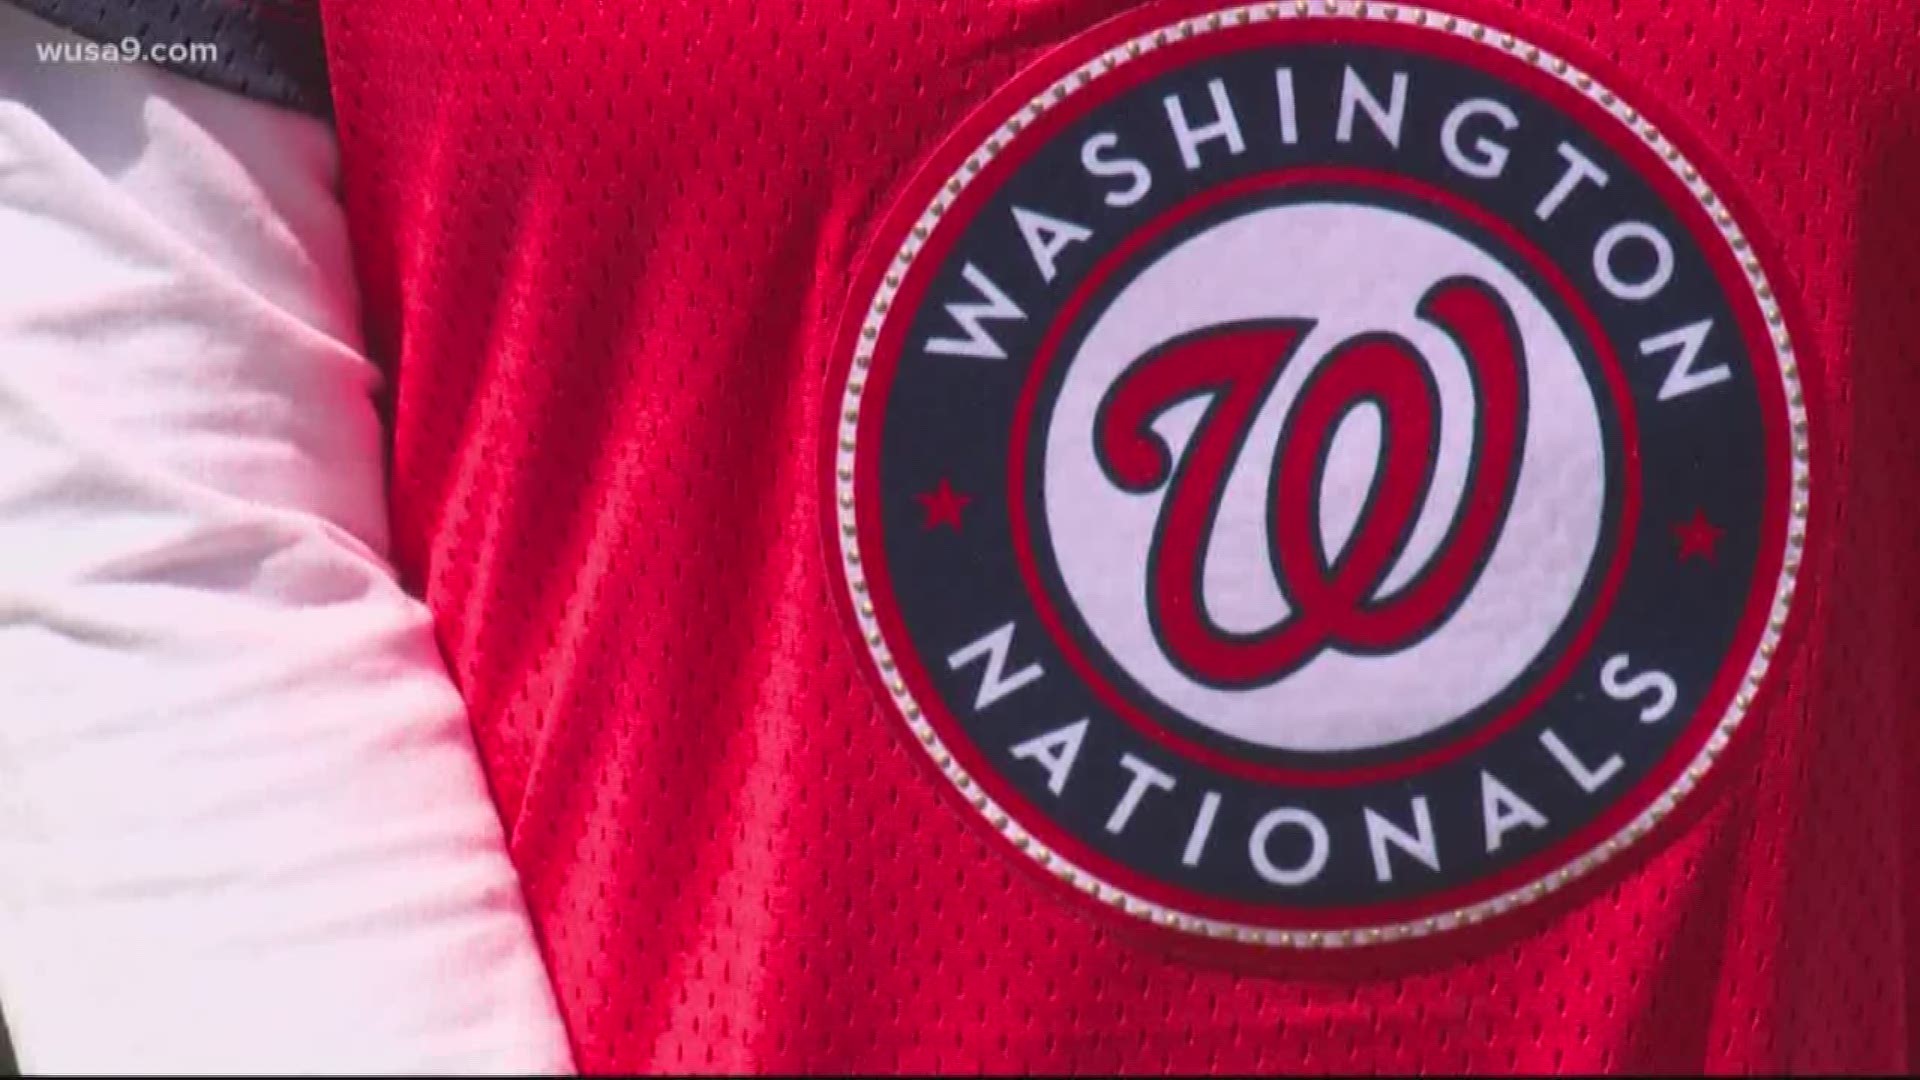 Nationals fans sang "Take Me Out to the Ball Game" despite no baseball being played.